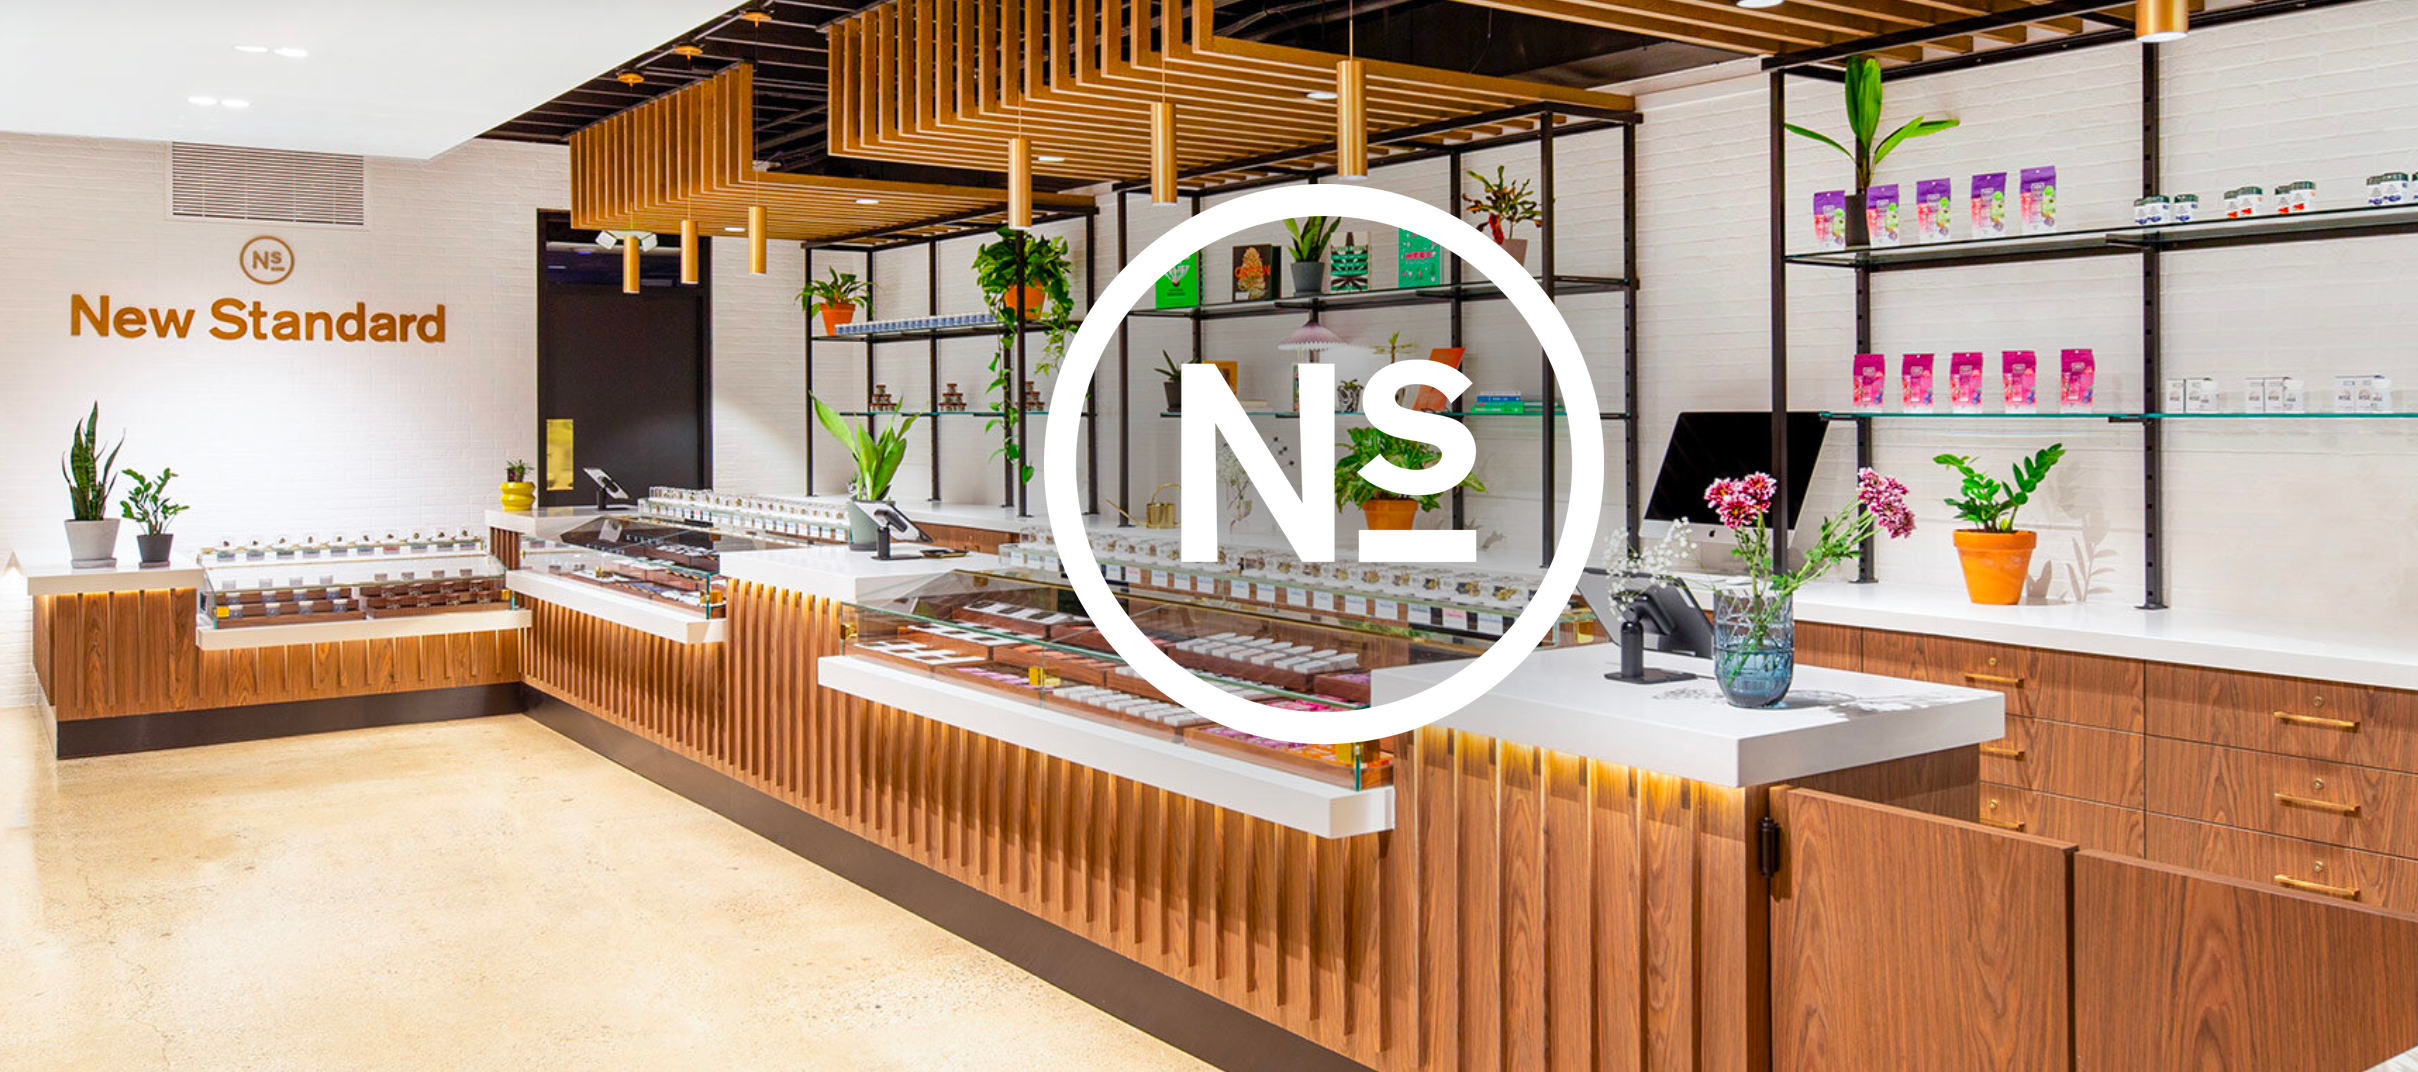 With Its Flagship Storefront Open, New Standard Looks To Define High-End Cannabis Retail